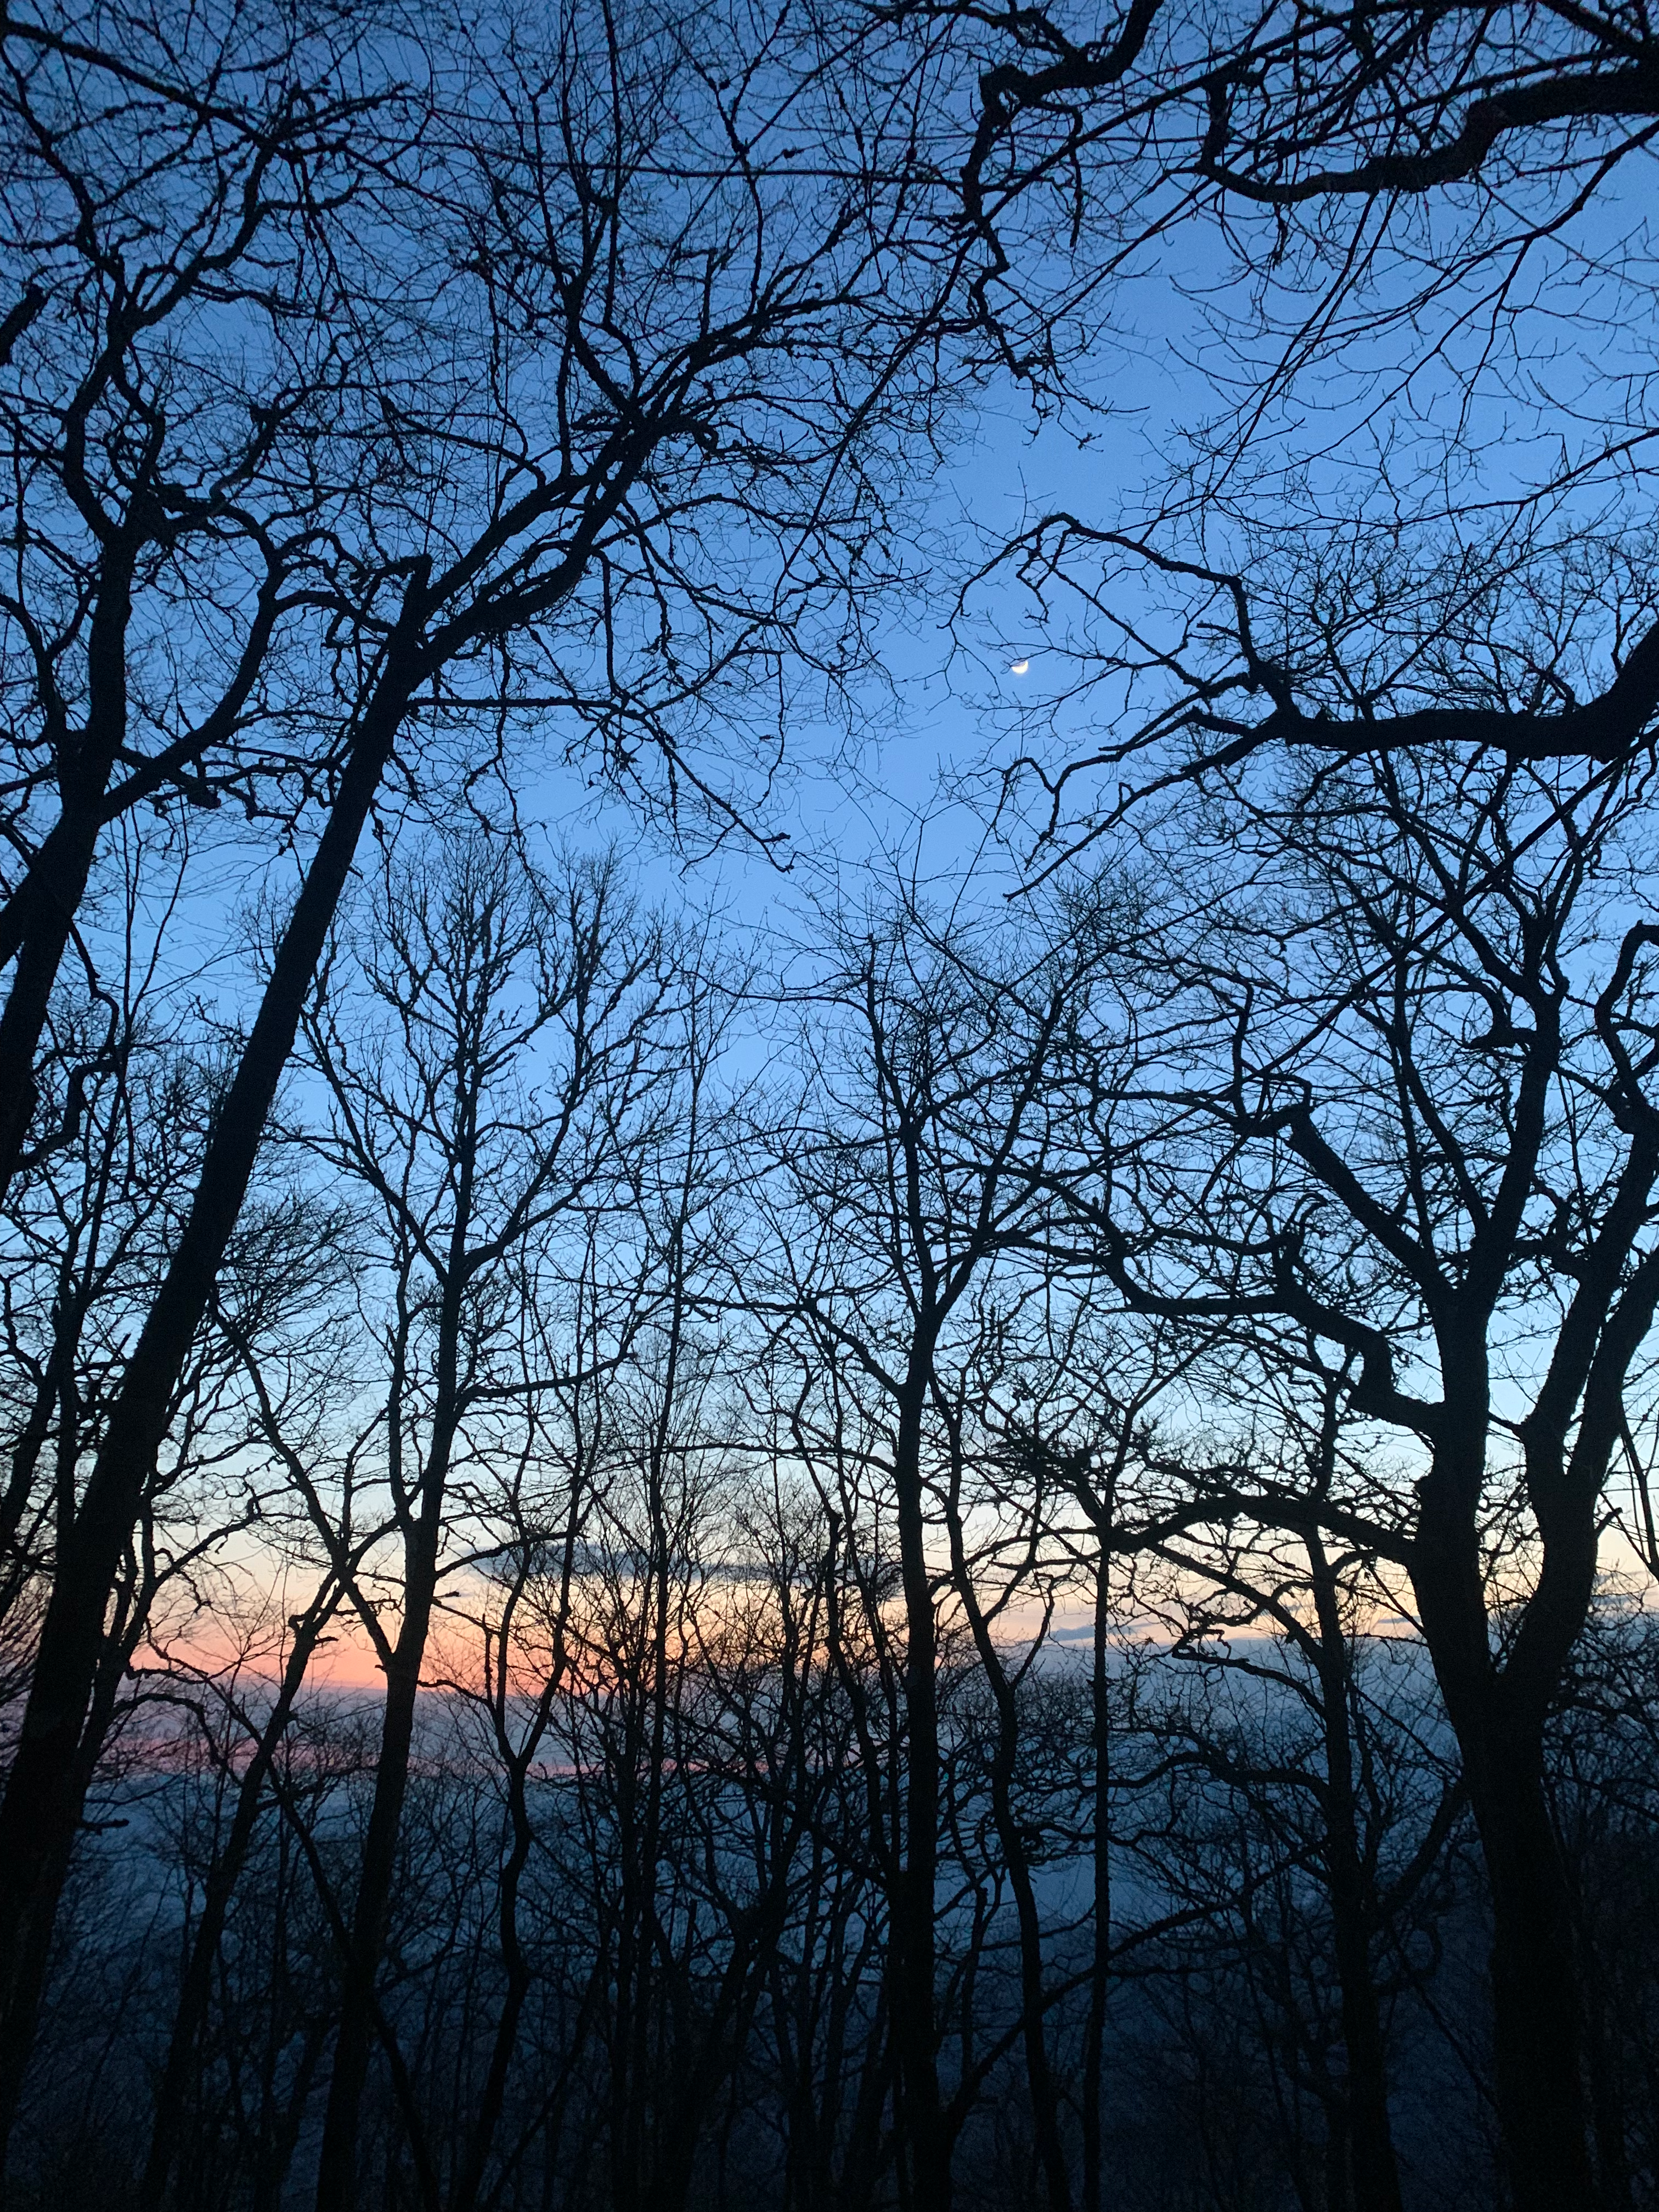 sunset in the mountains, through the trees, with the moon visible